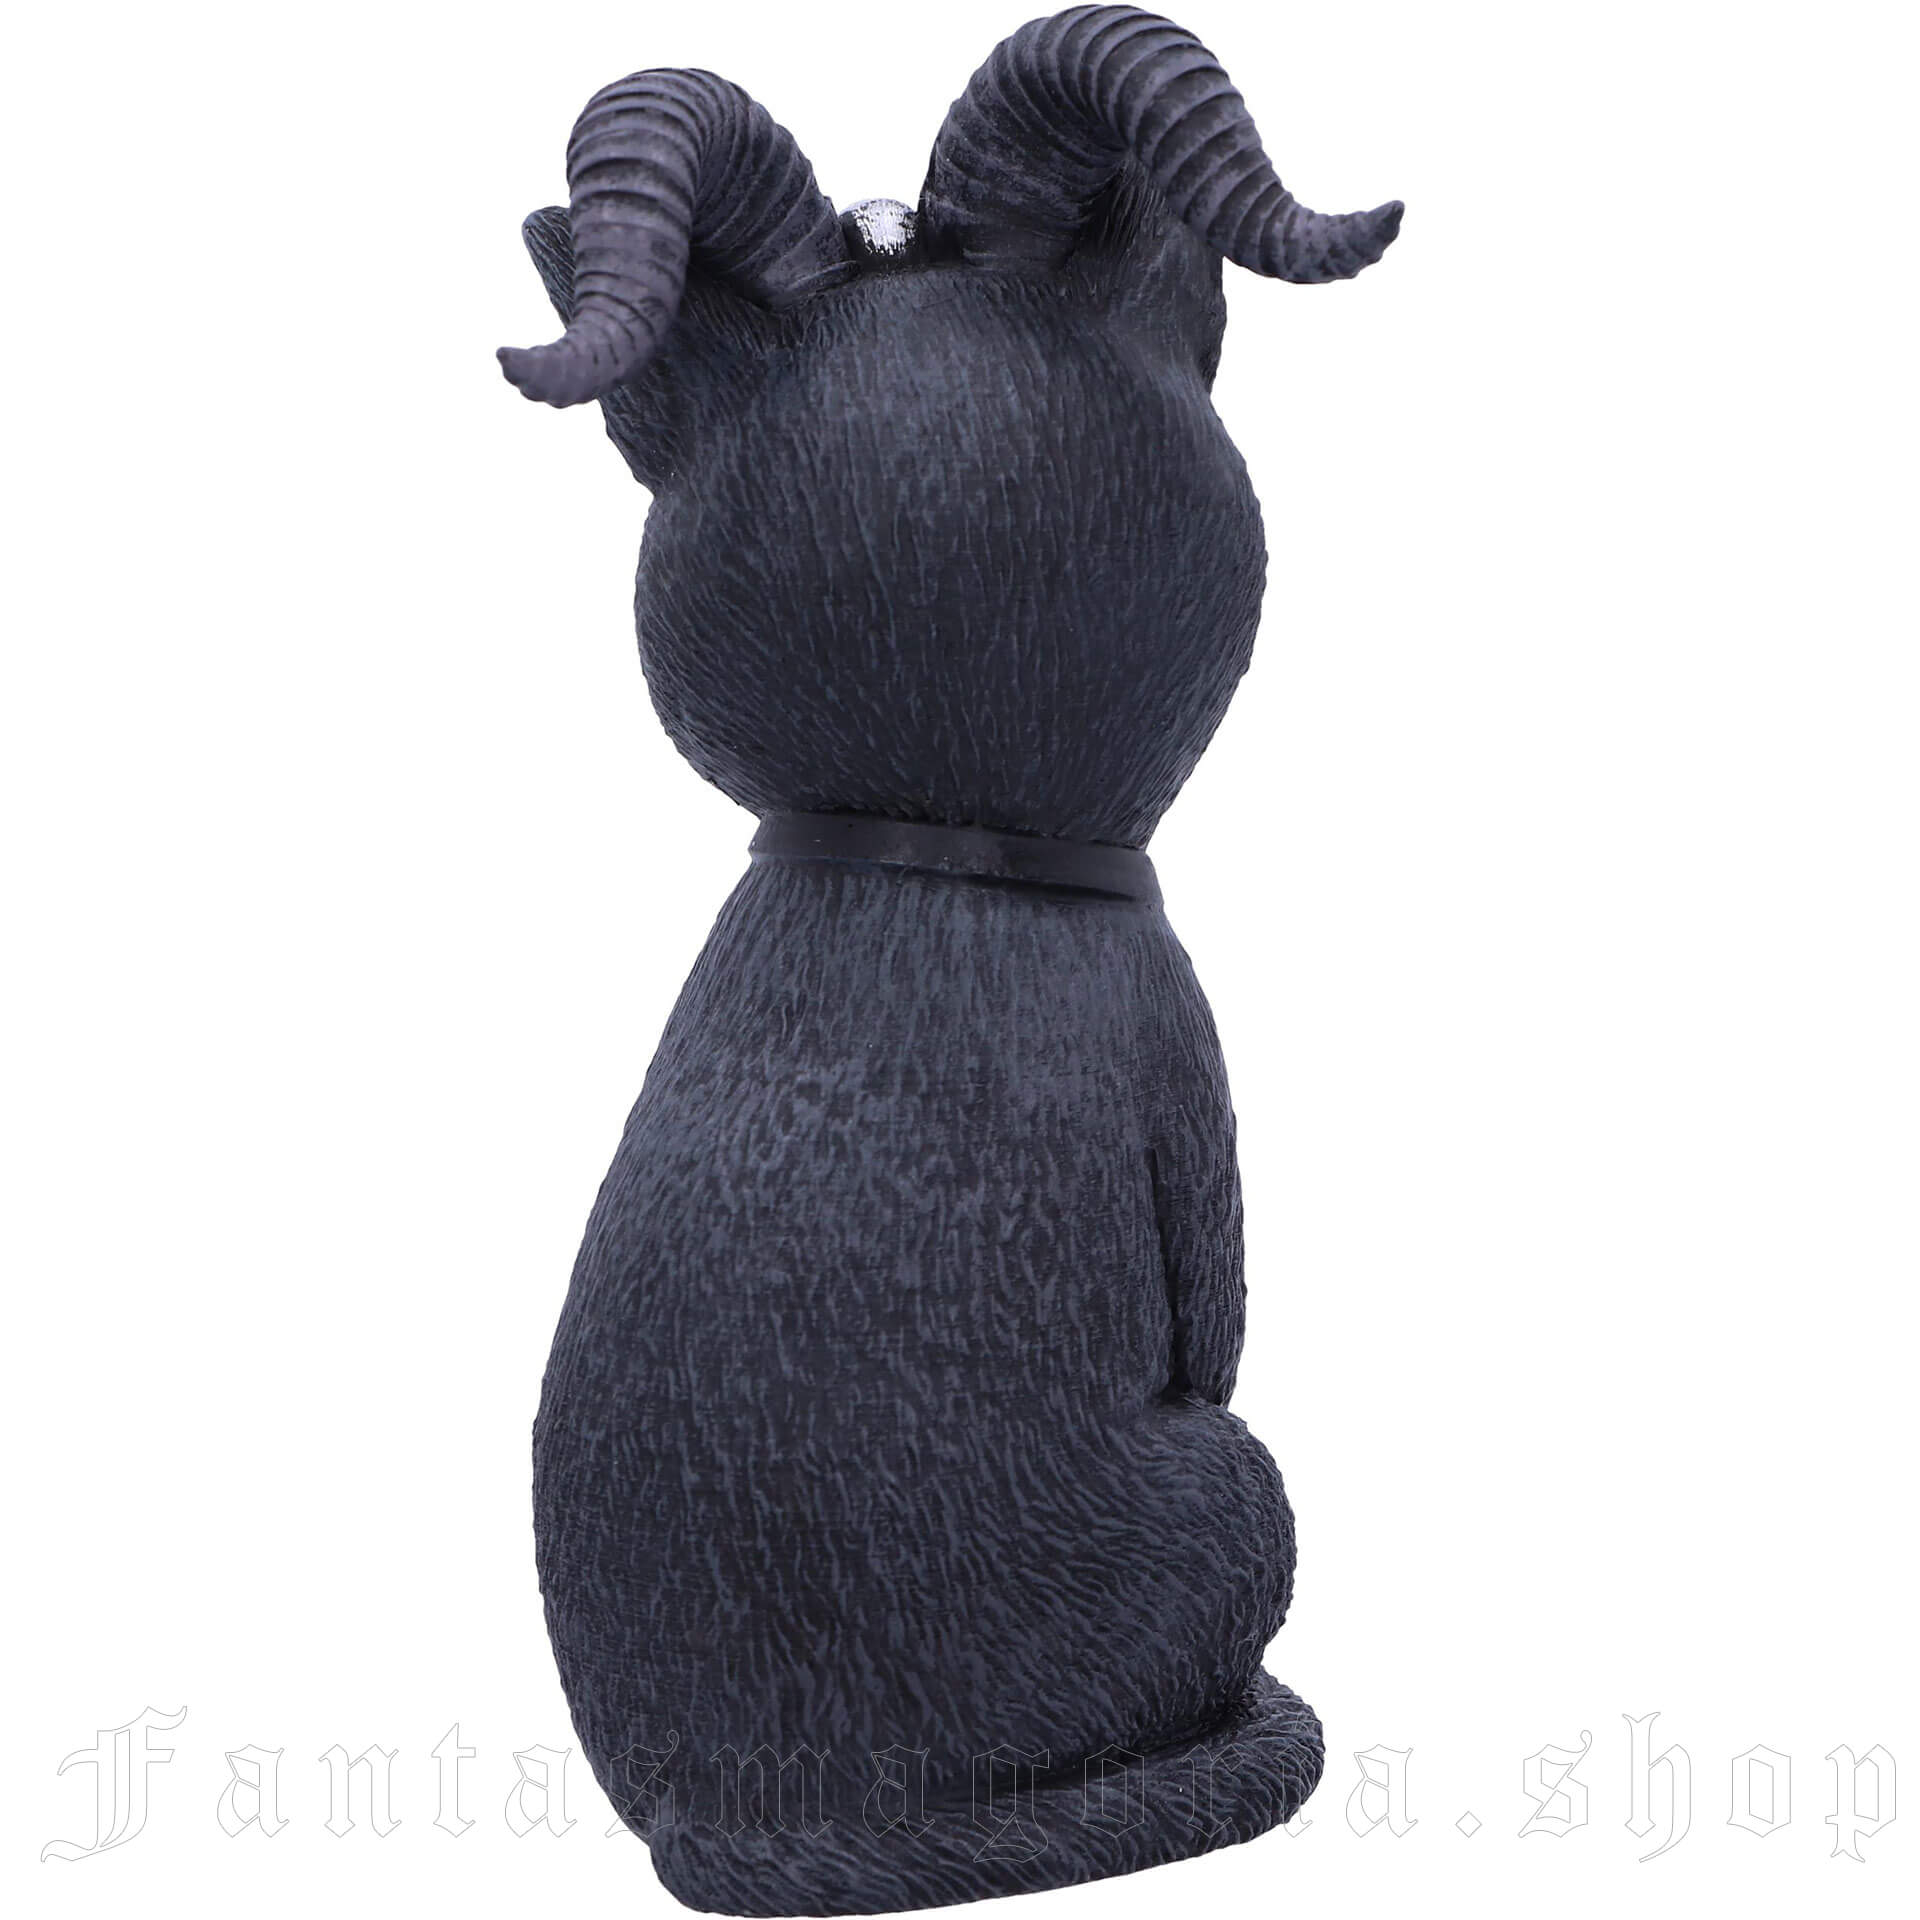 Horned cat figurine by Nemesis Now.